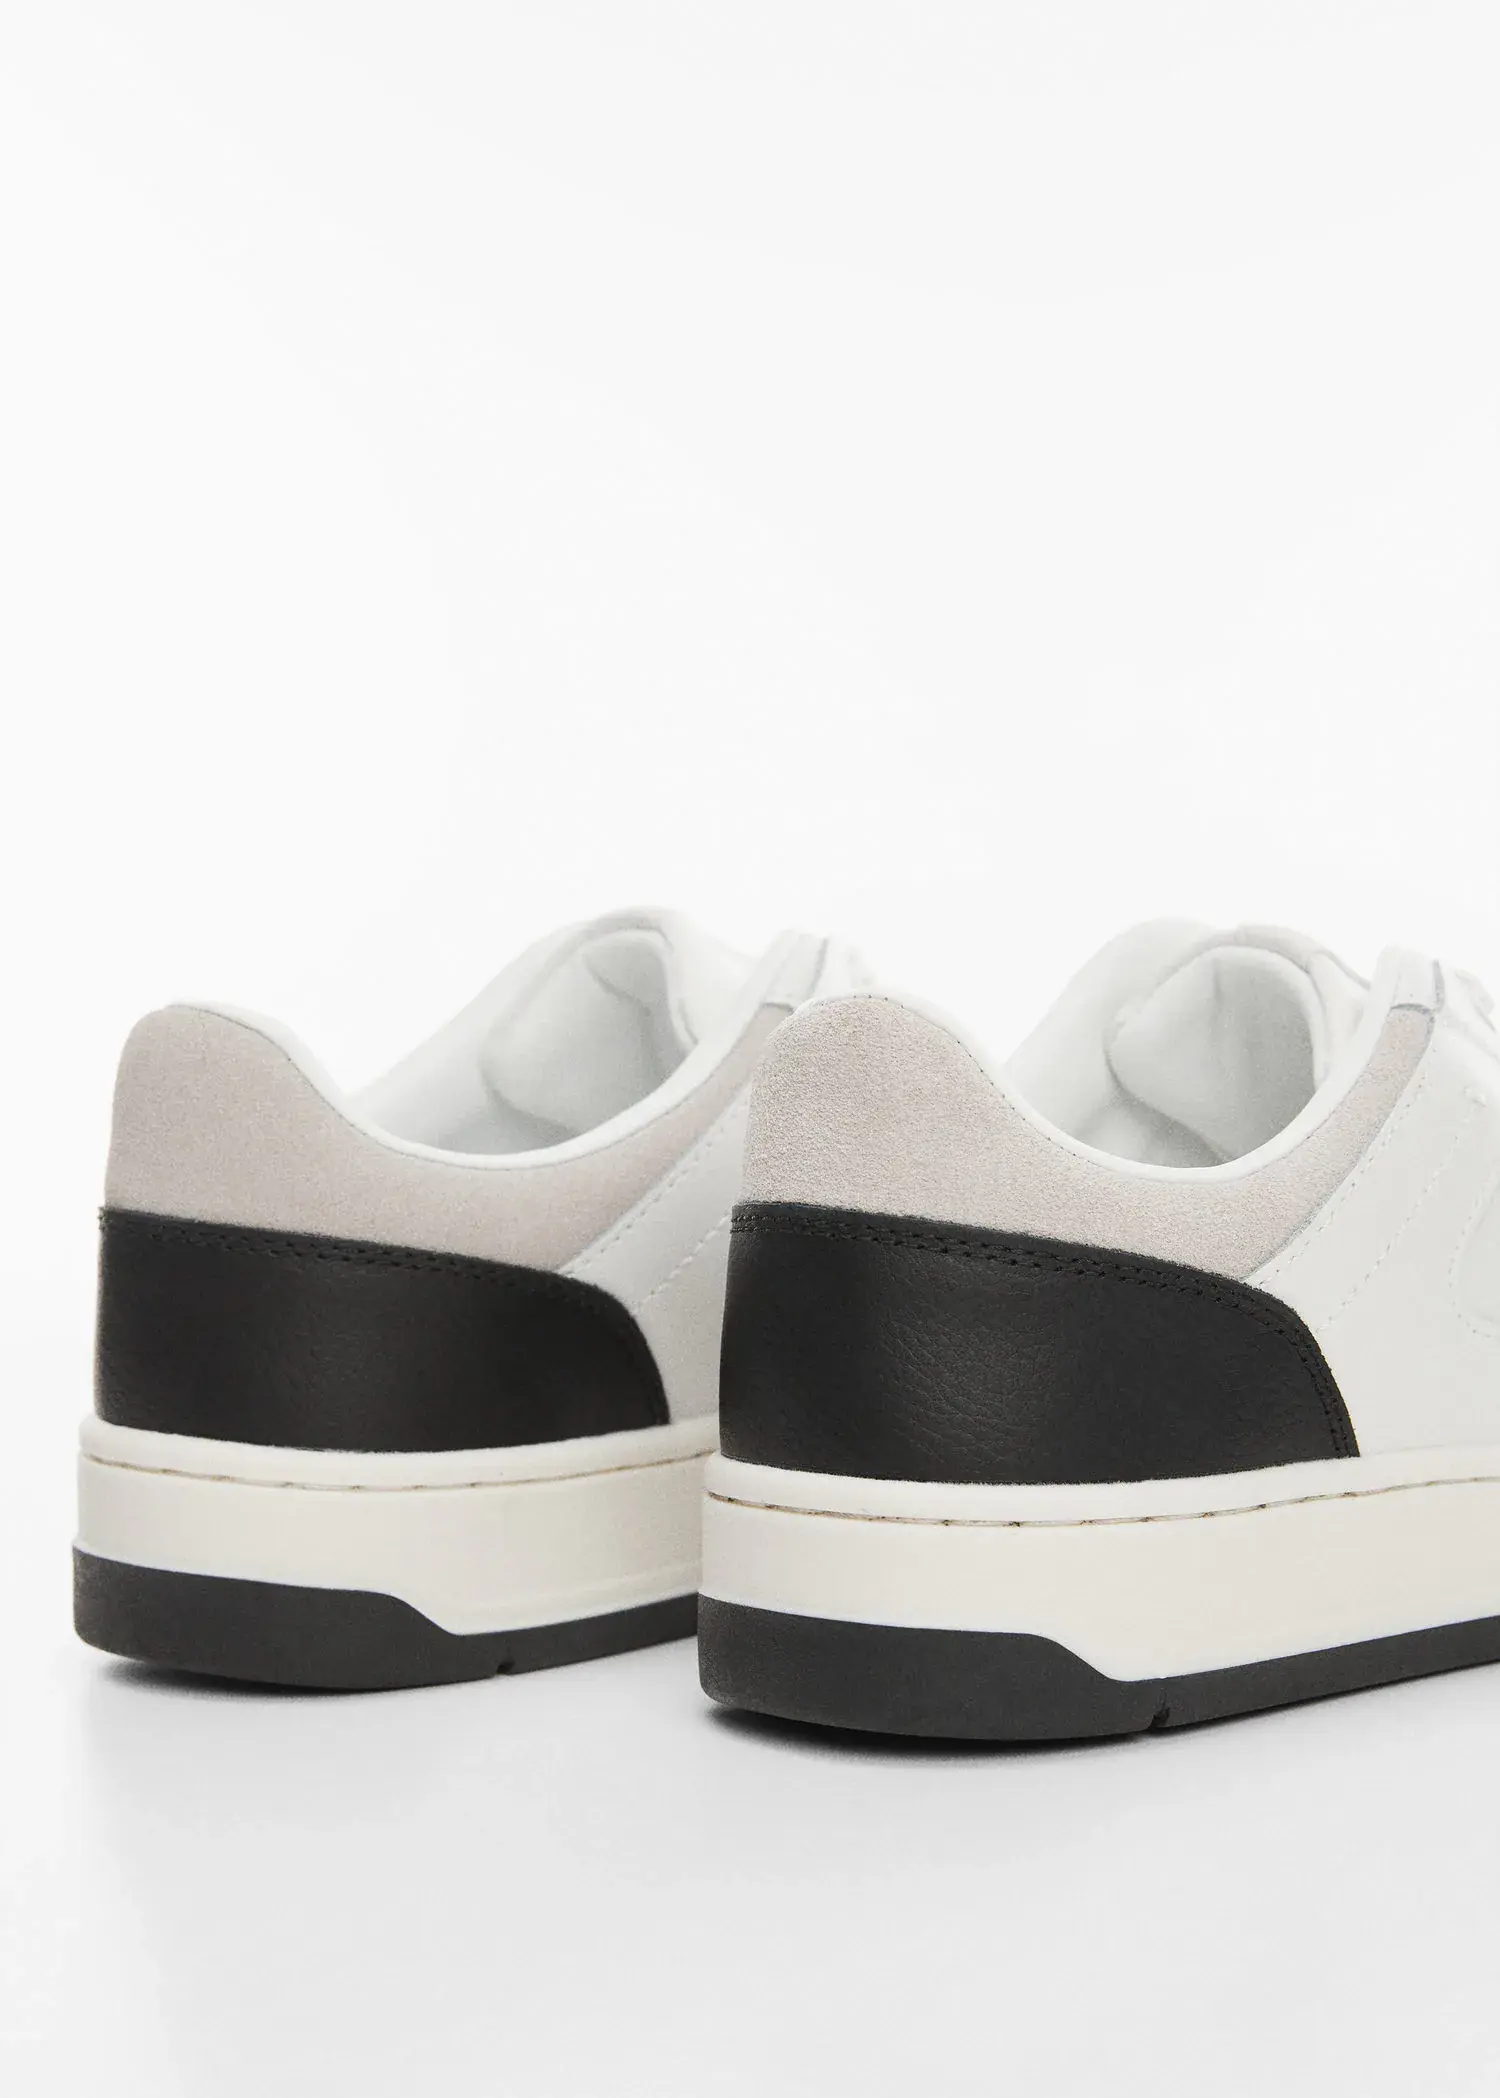 Mango Combined leather sneakers. 3